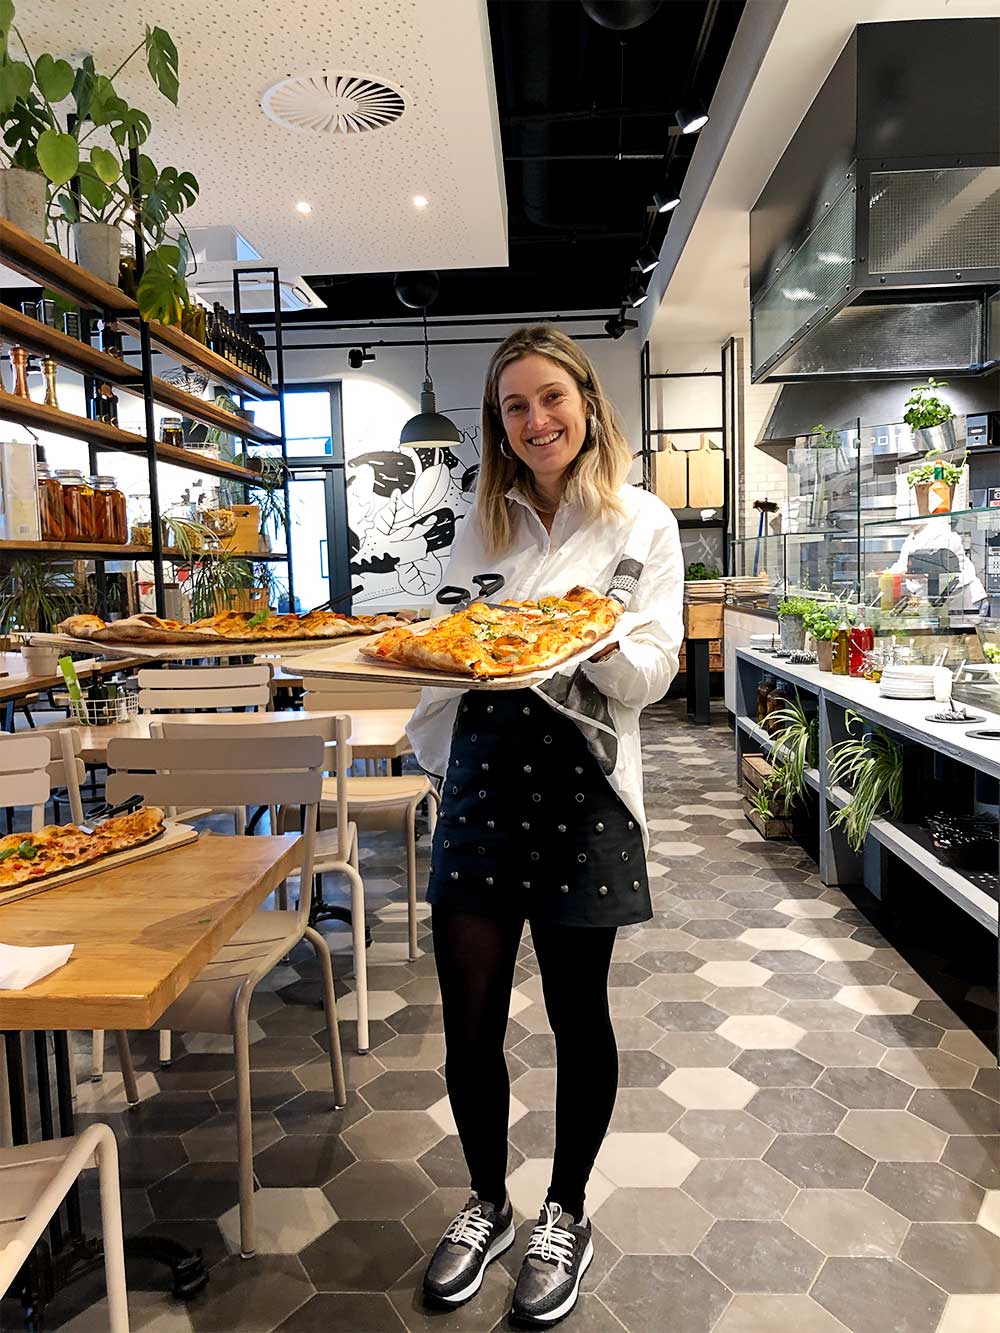 Sara with a pizza platter in hand in Berlin, at the designer outlet pizzeria.